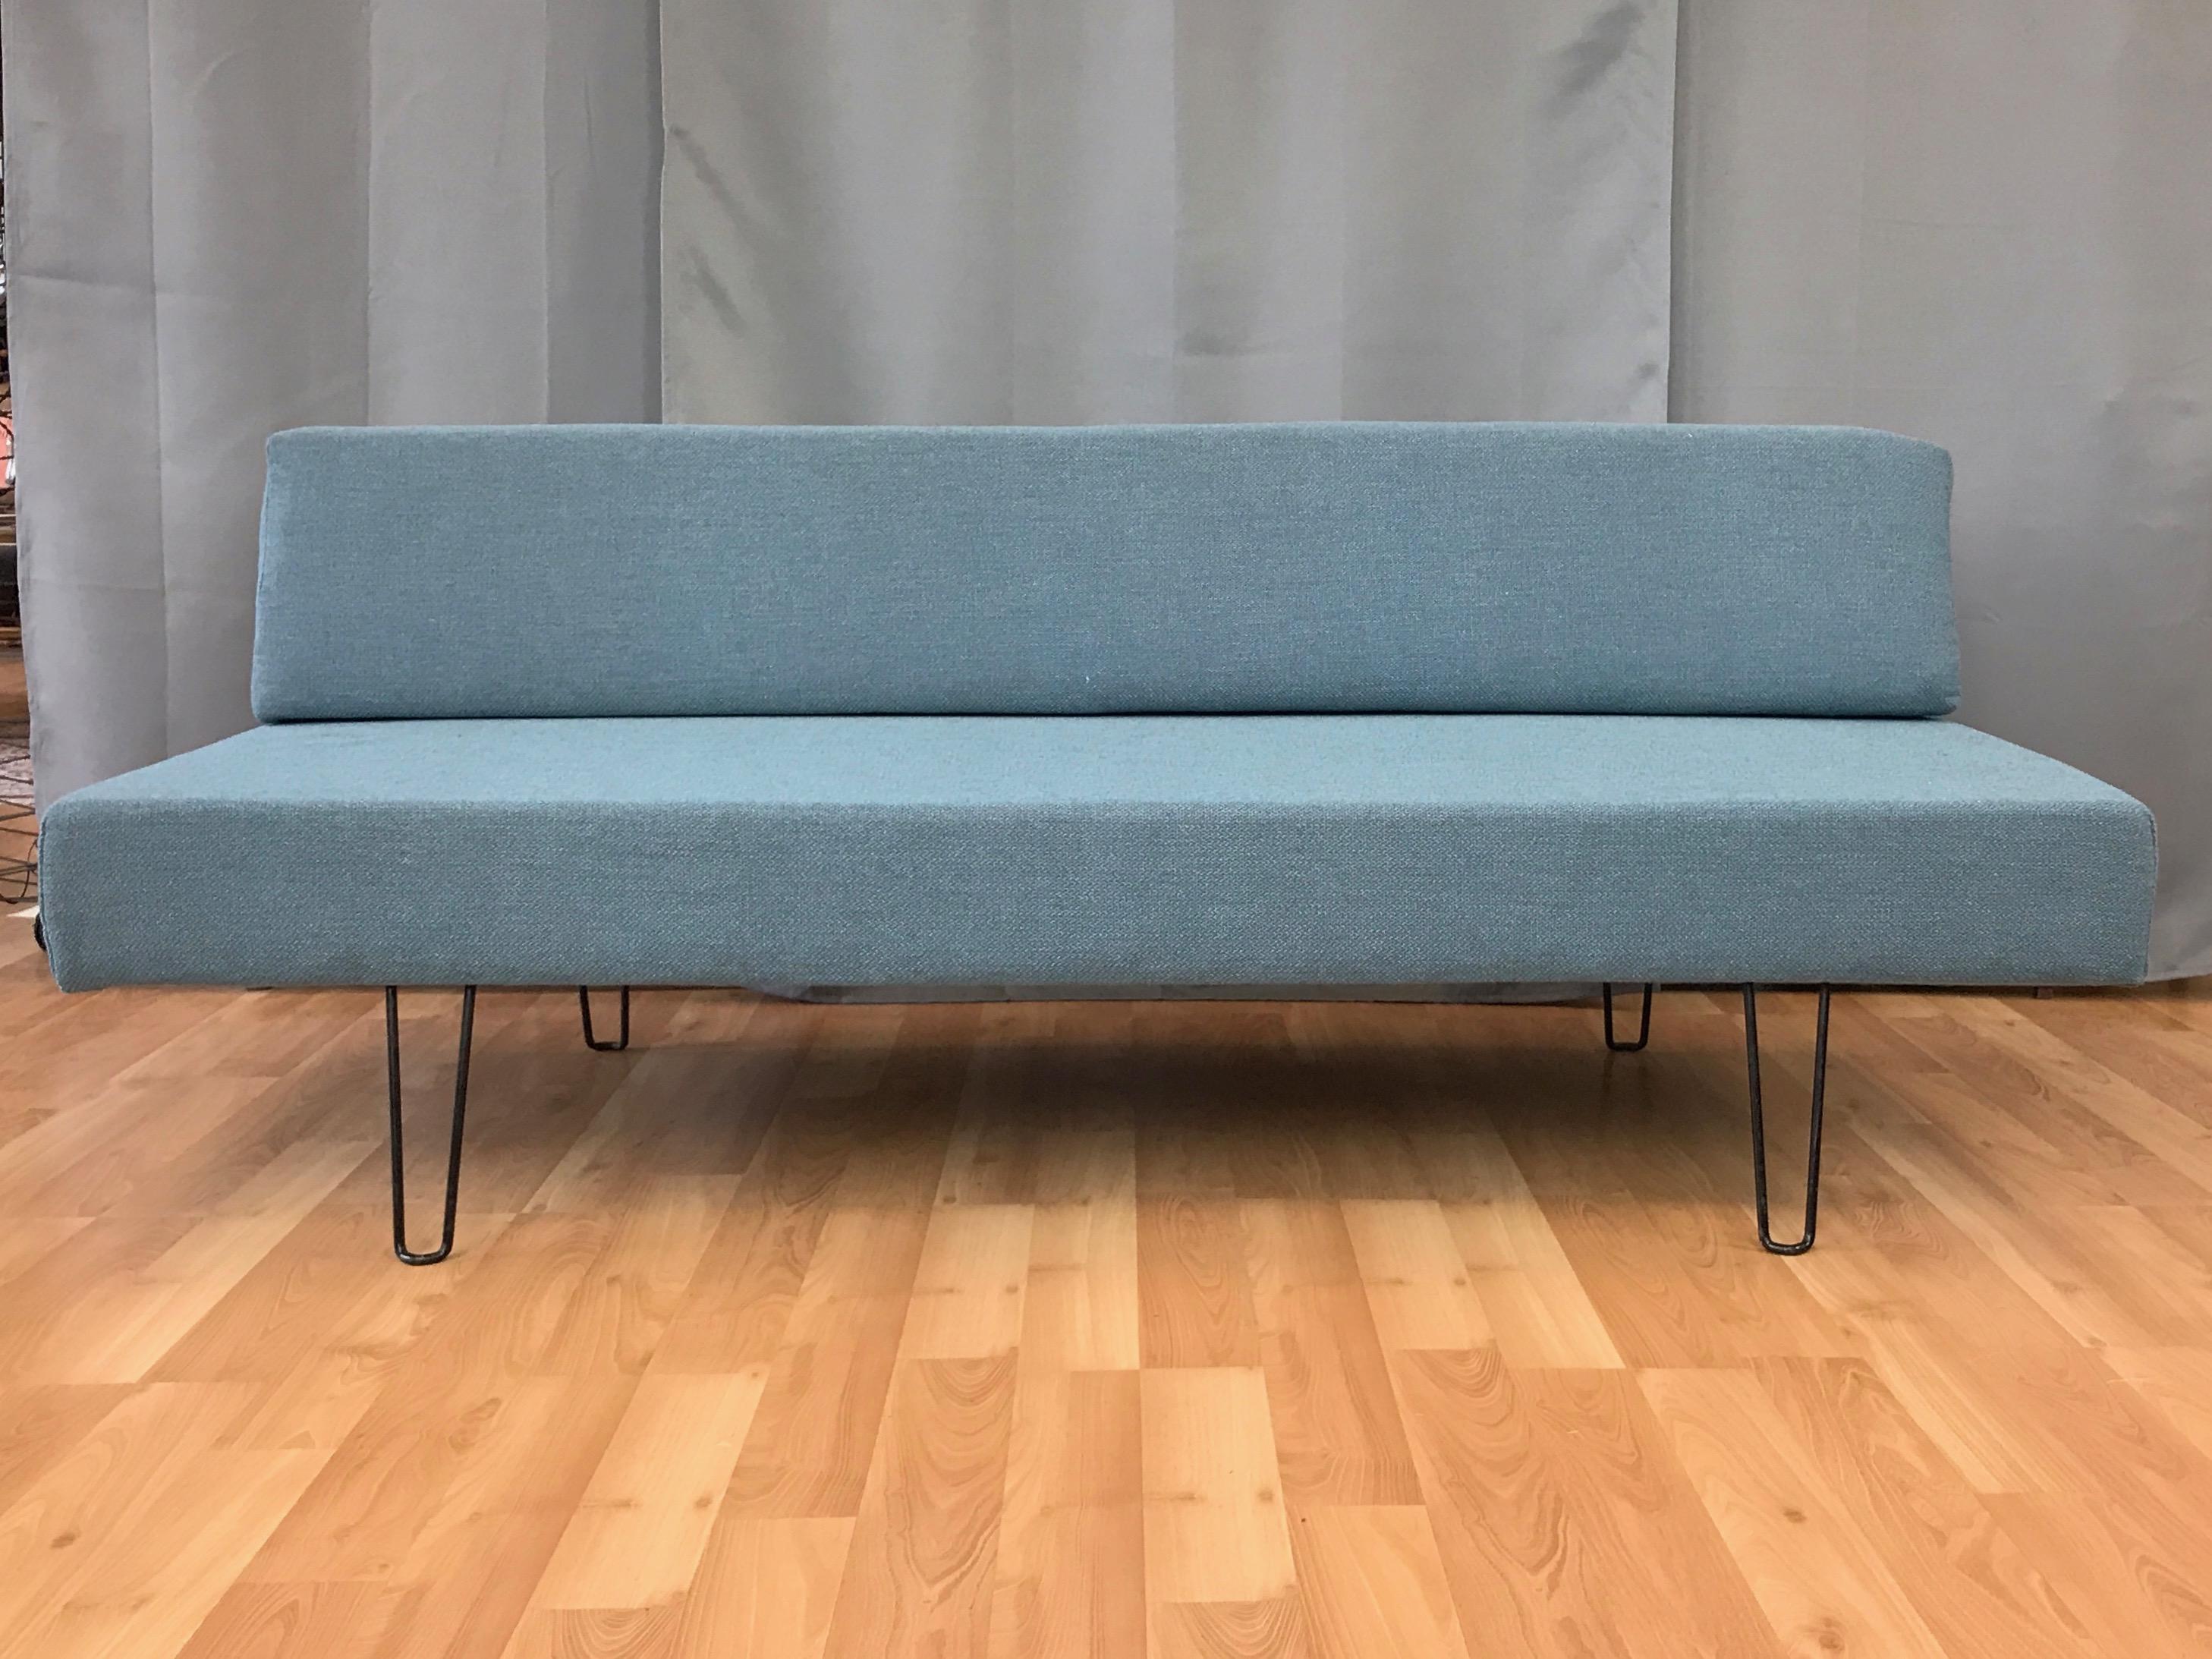 A 1950s Mid-Century Modern daybed or sofa with hairpin legs.

Minimalist form features a loose wedge back on a rectangular seat with internal wood frame. Crisply reupholstered in vintage cool-hued wool heather fabric over new high grade foam. Bent